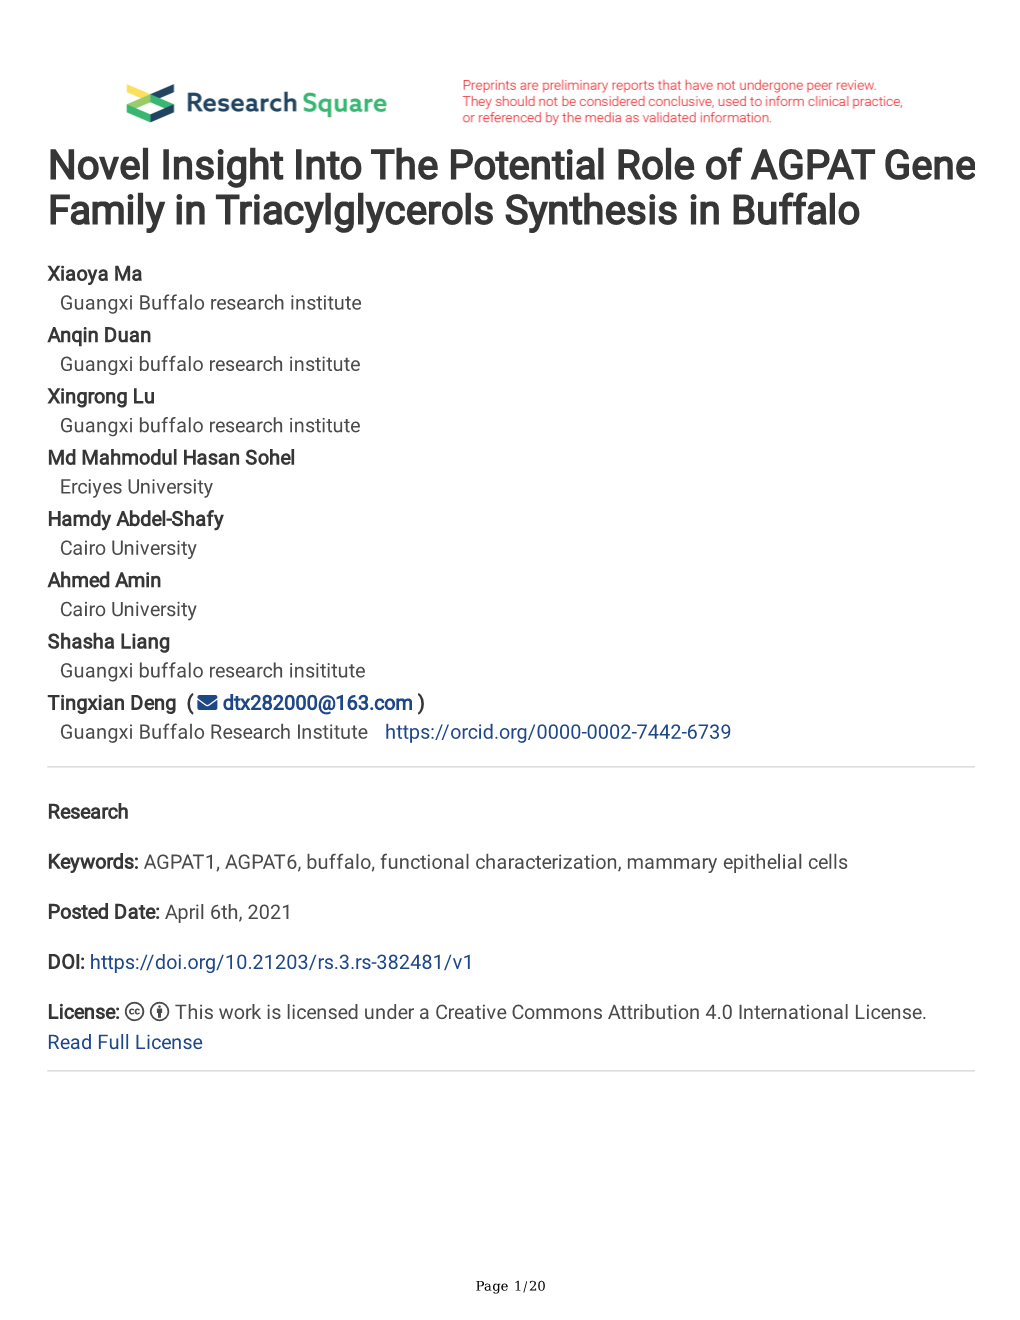 Novel Insight Into the Potential Role of AGPAT Gene Family in Triacylglycerols Synthesis in Buffalo